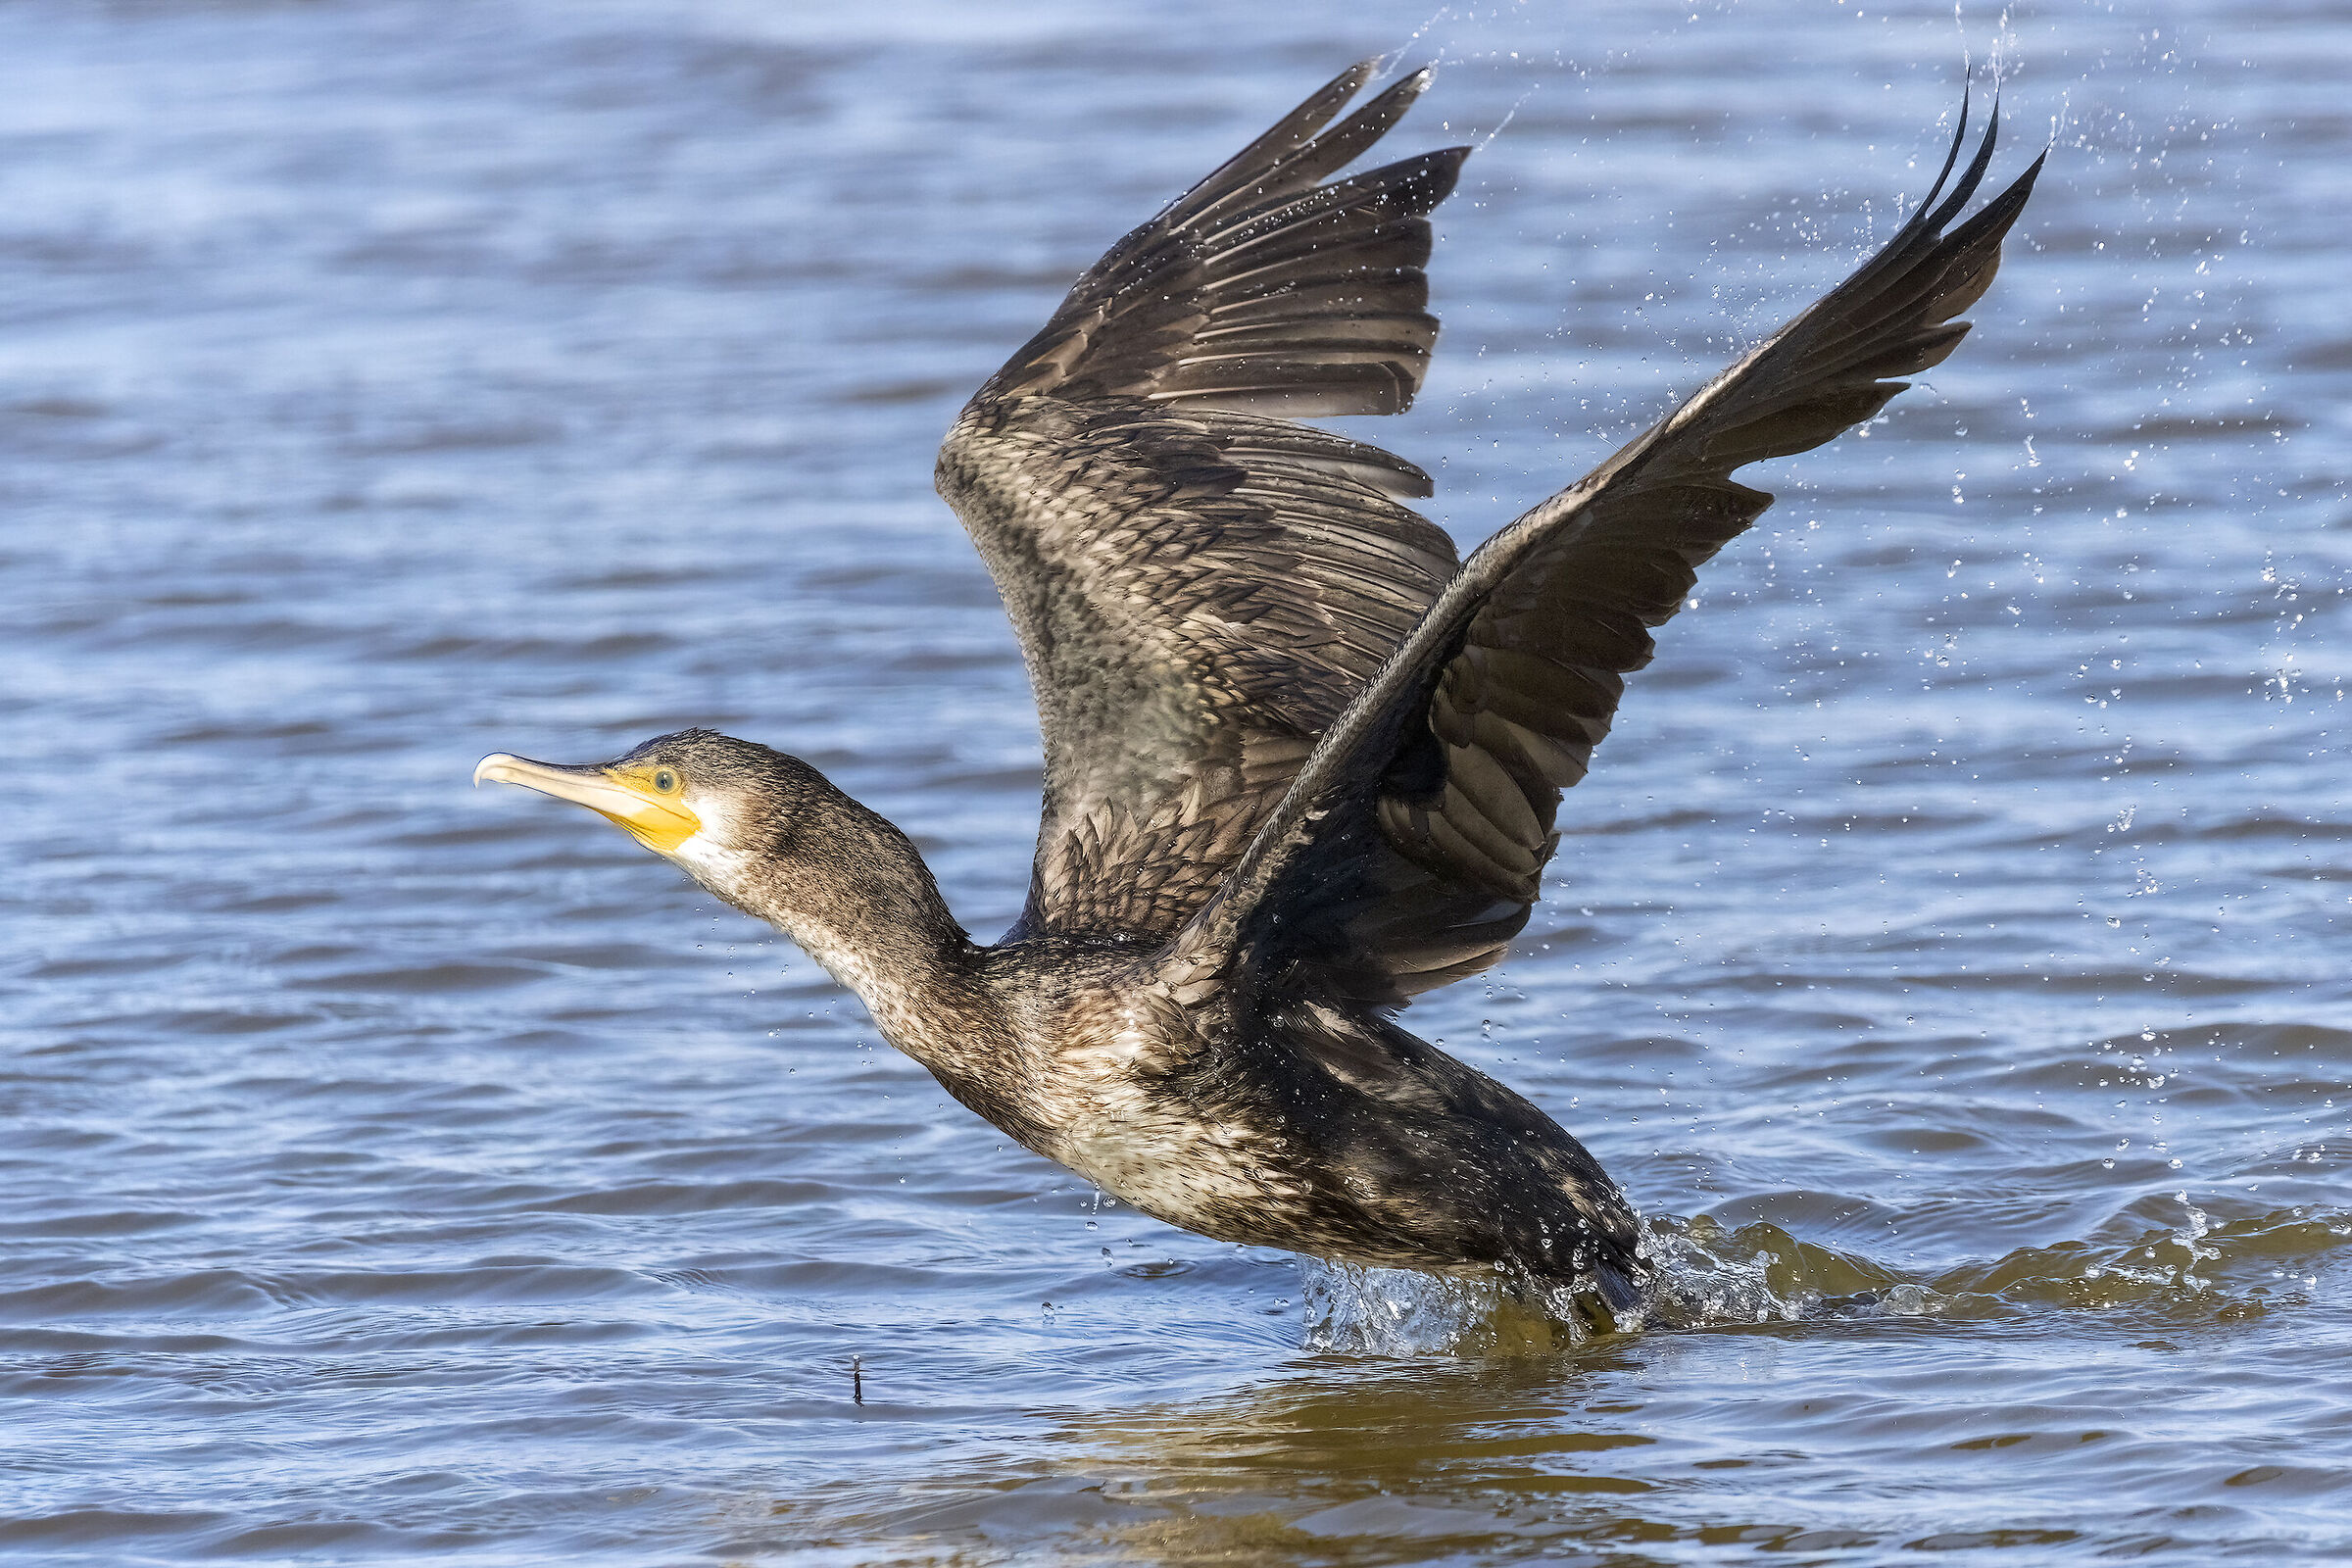 The take-off of the cormorant...